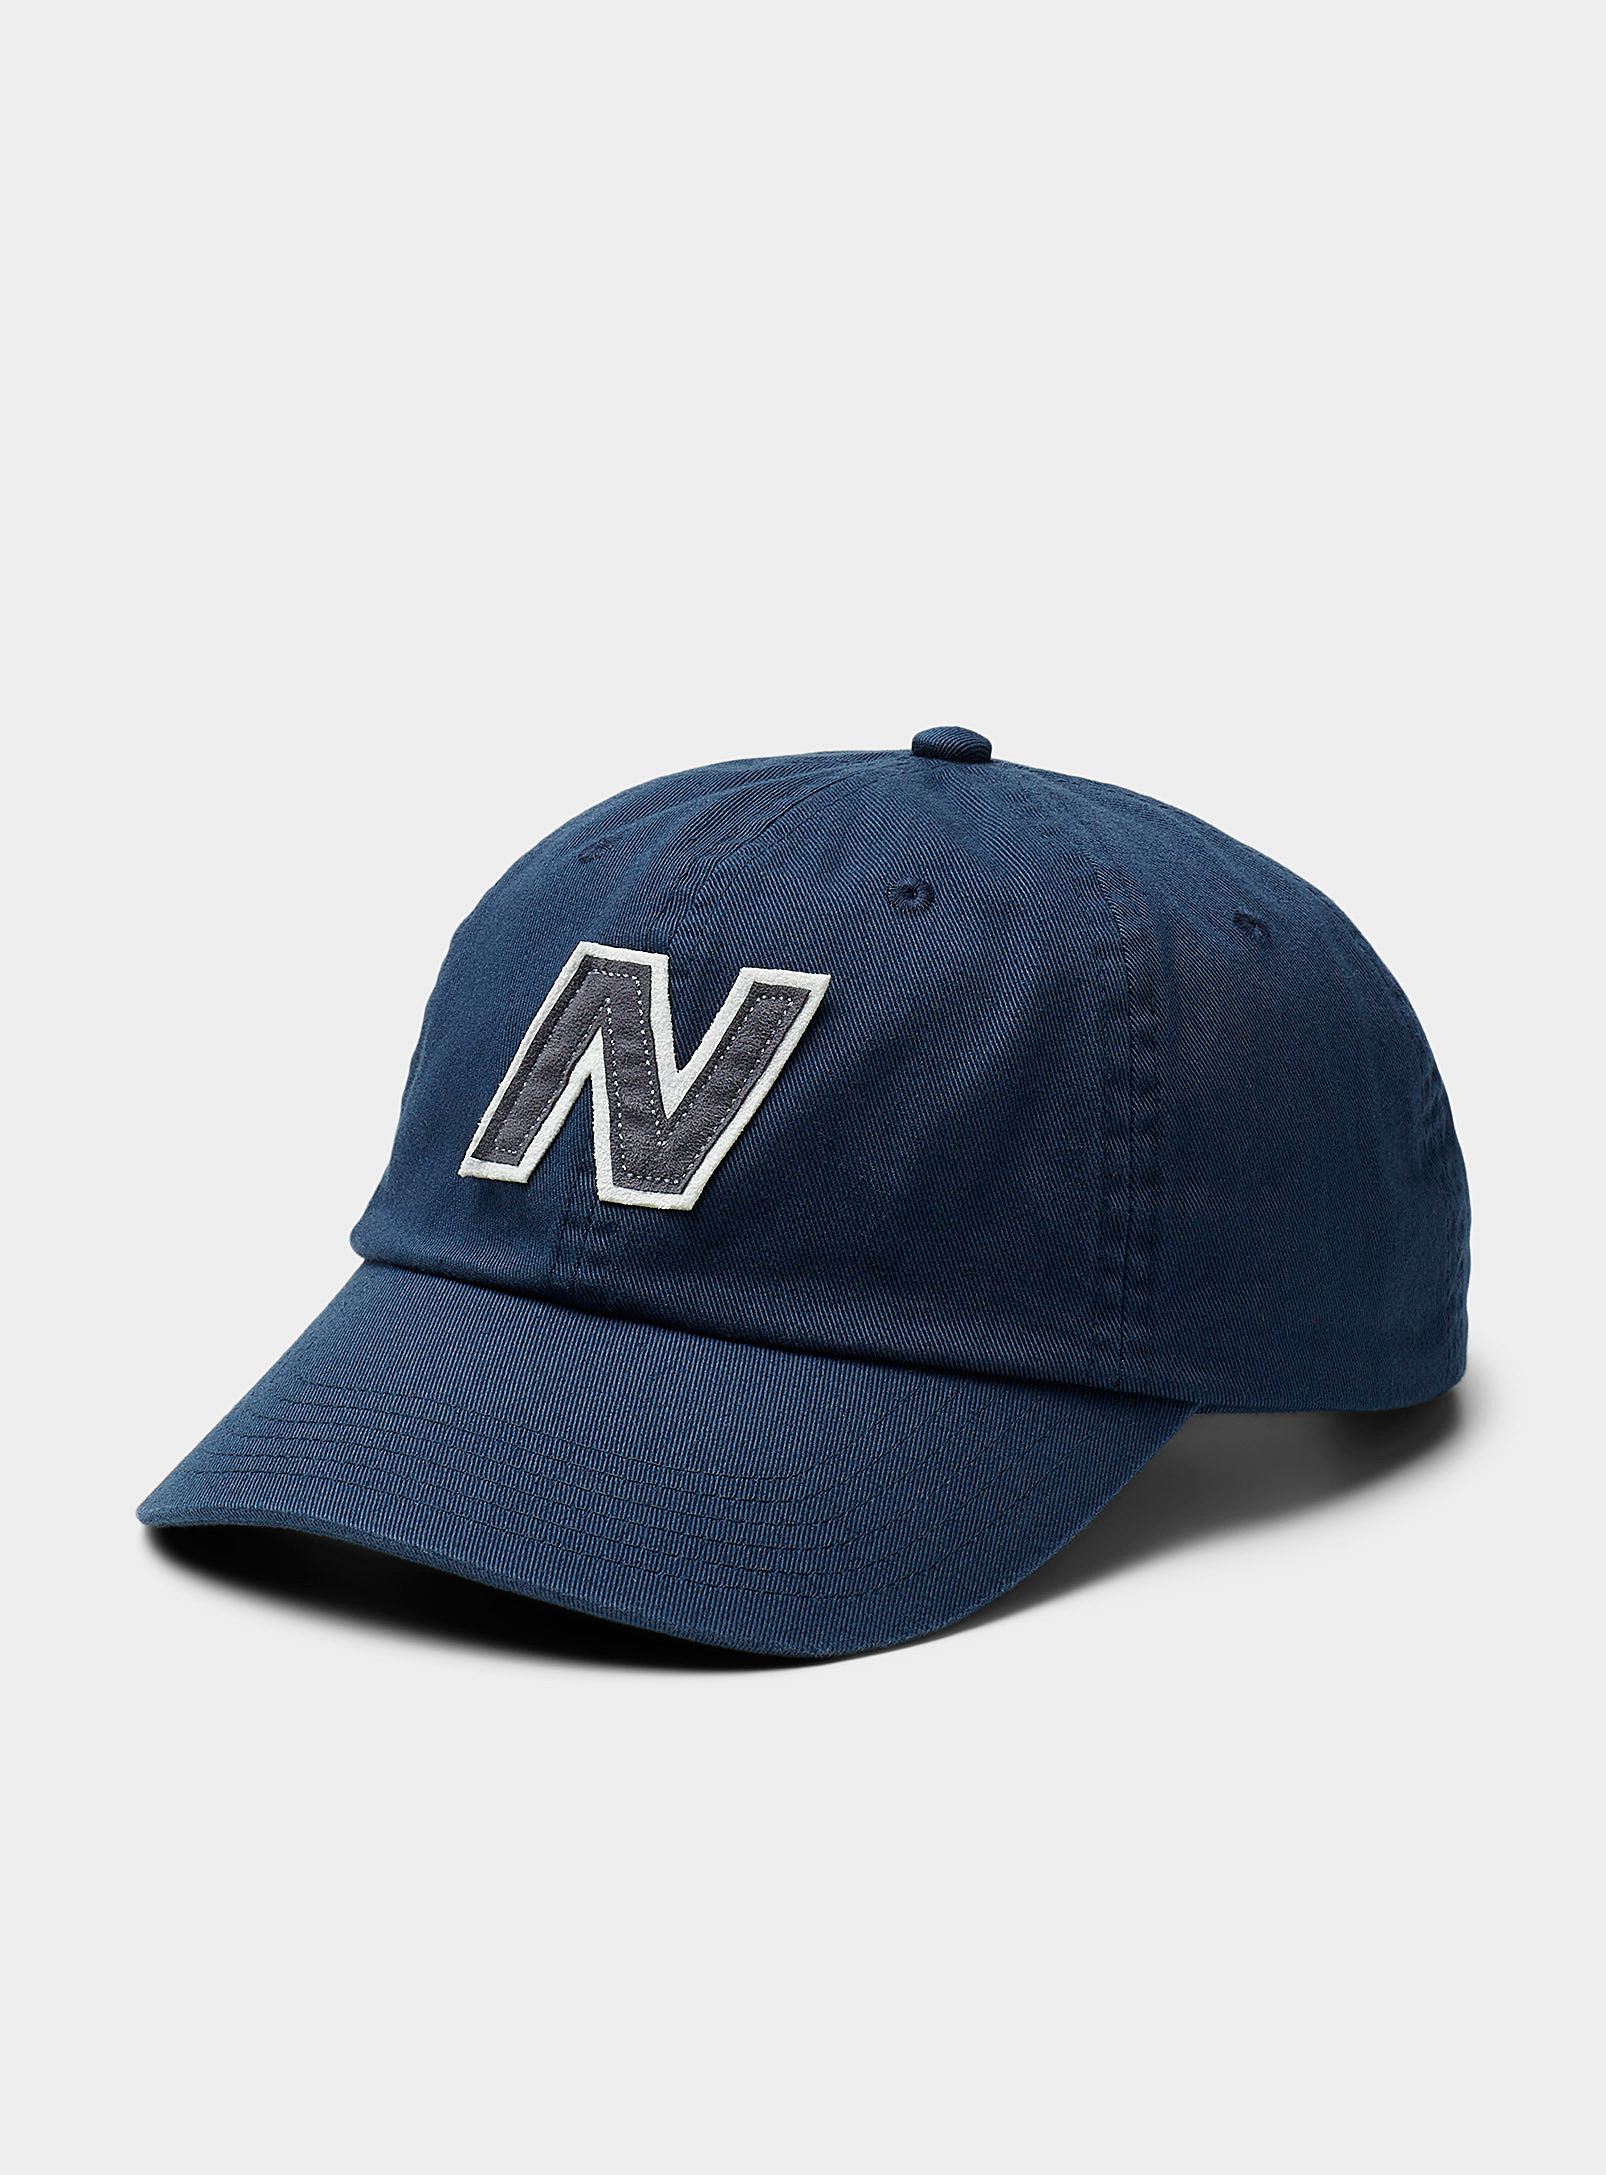 New Balance Embroidered Letter Dad Cap In Blue